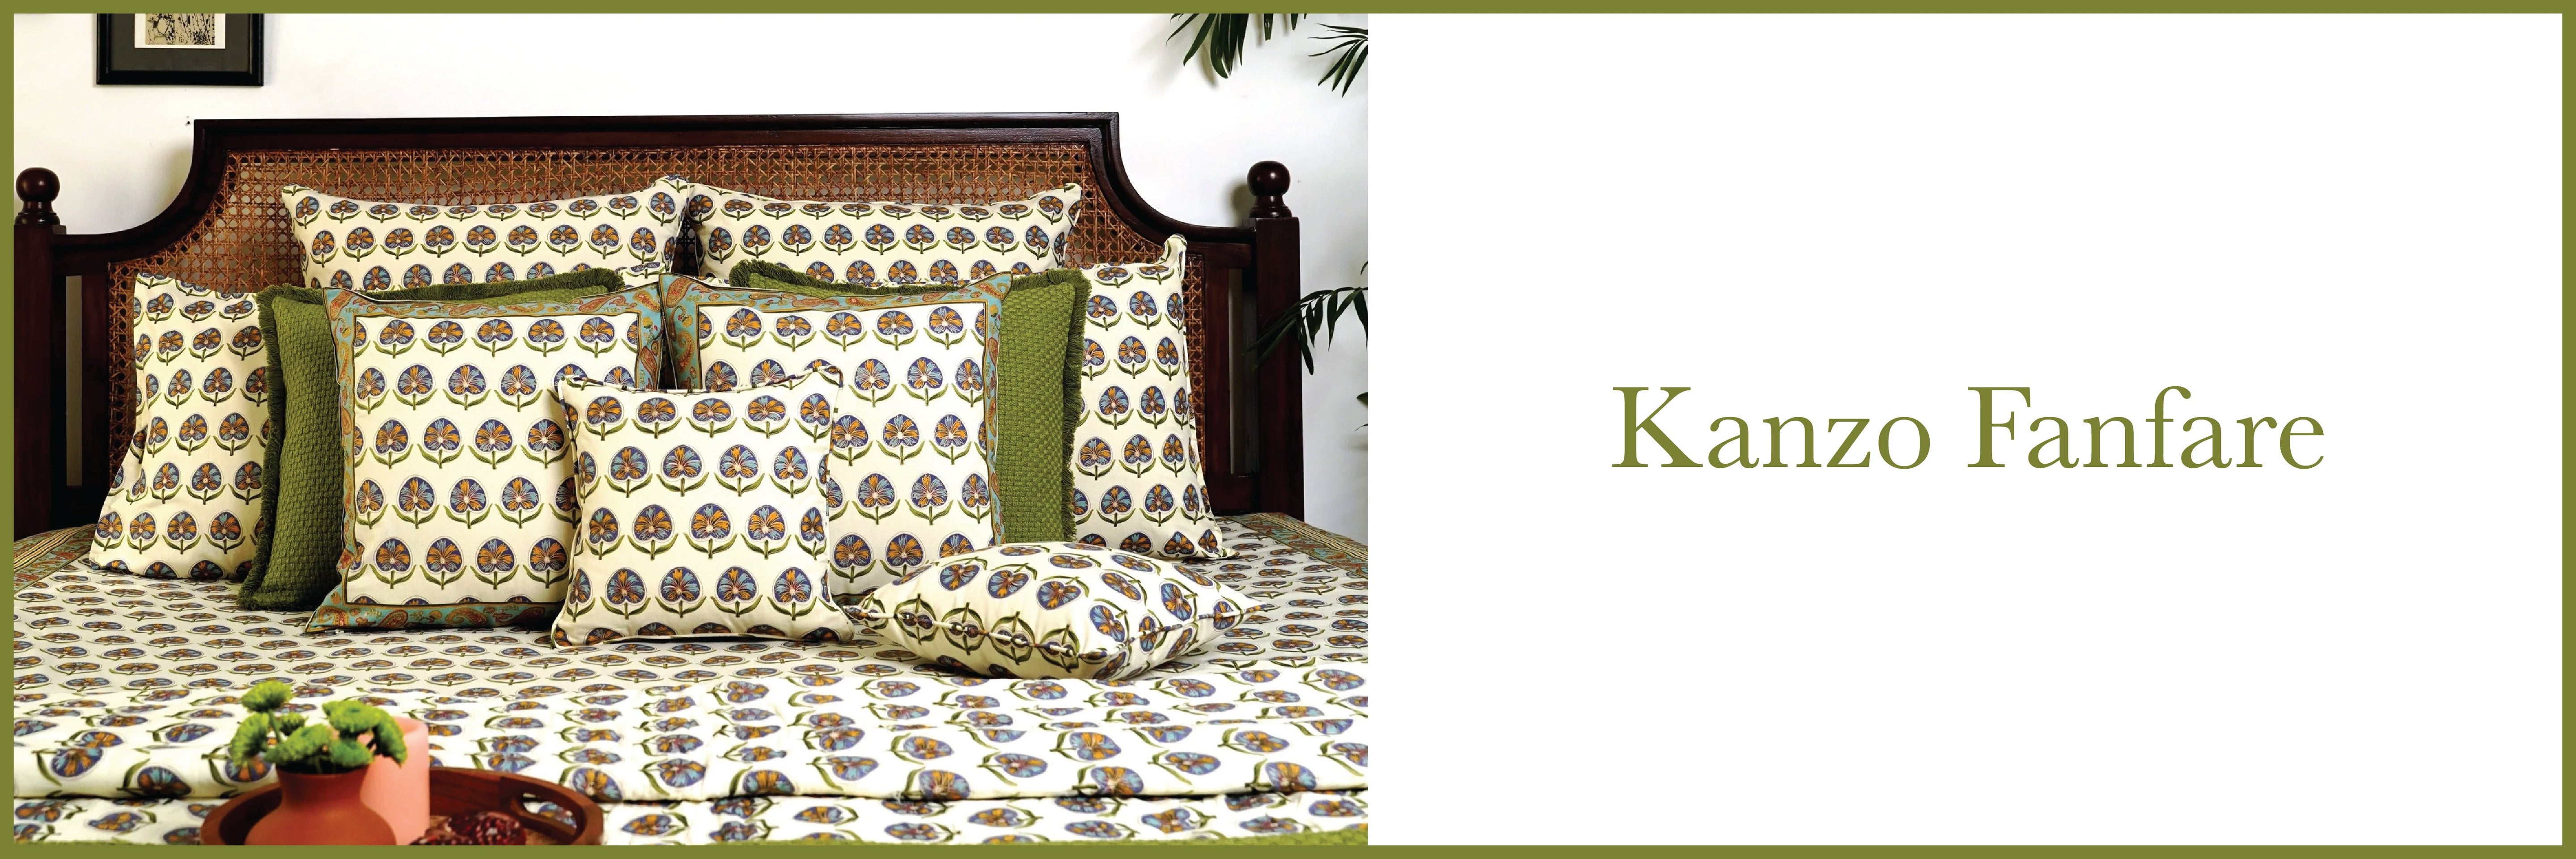 Kanzo Fanfare - Bedroom Collection